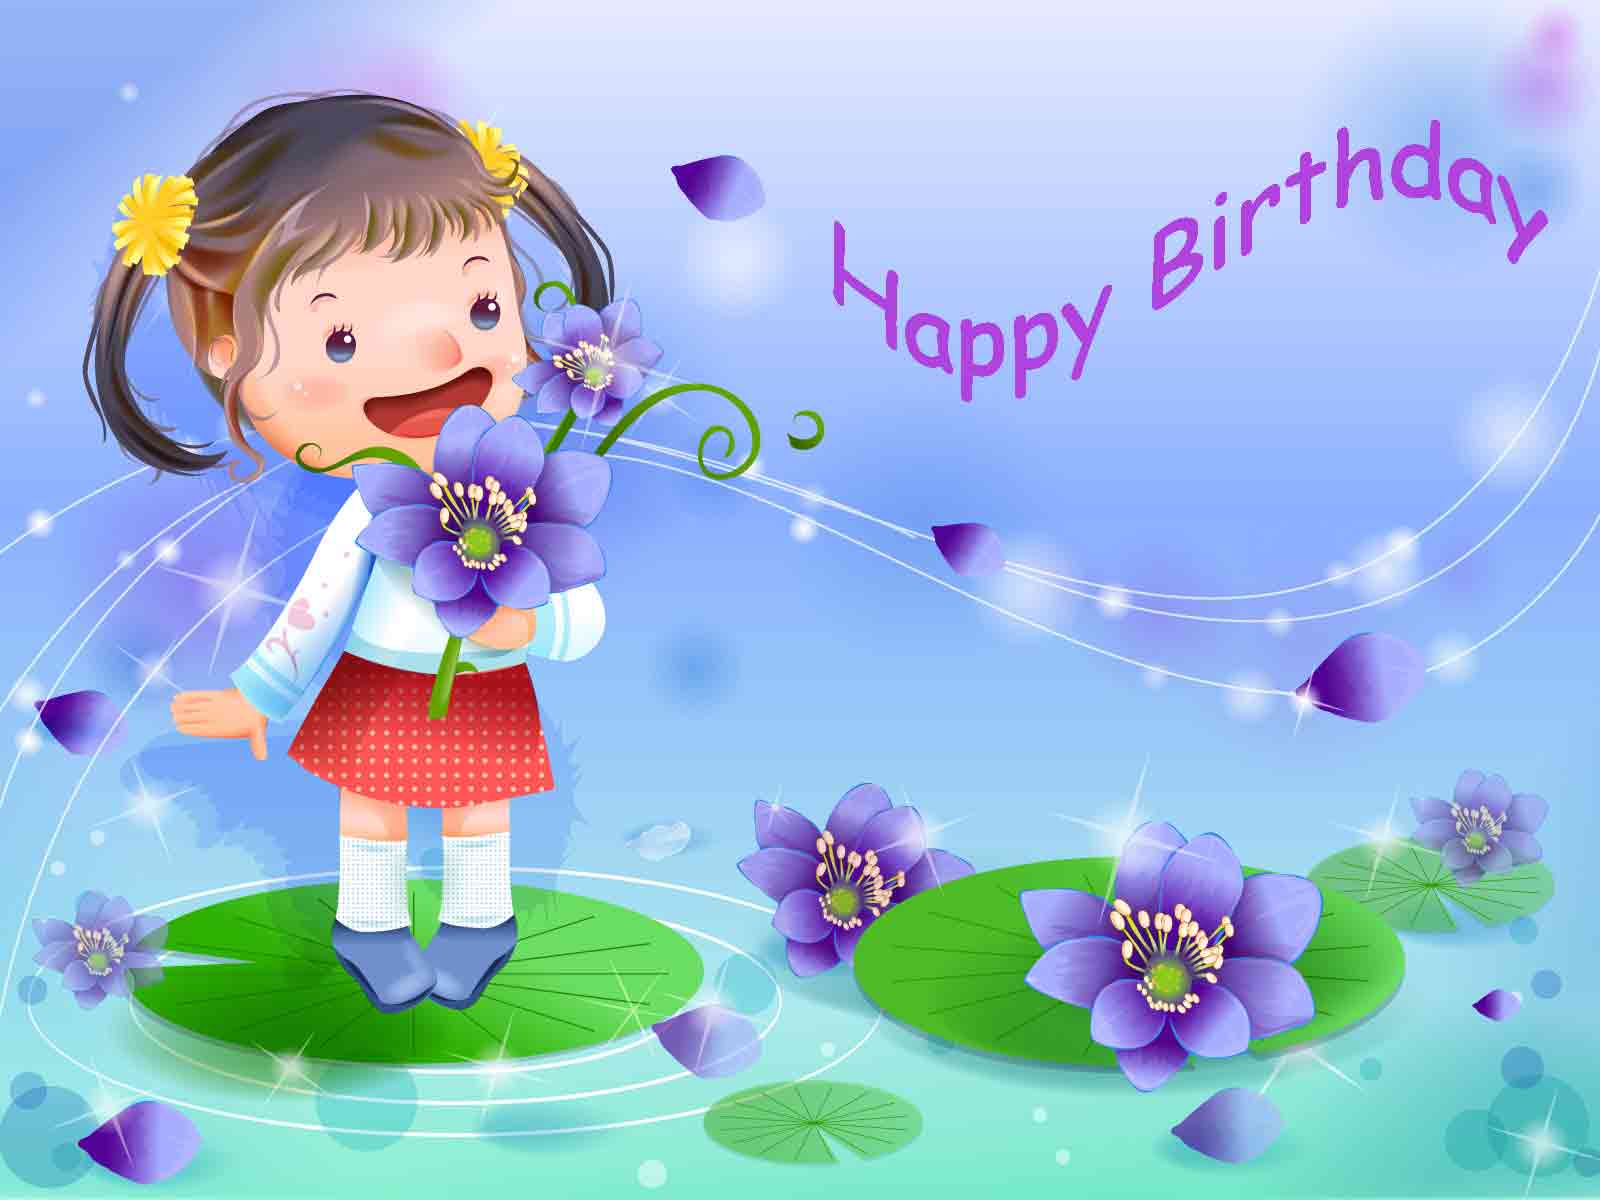 Happy Birthday Wallpapers Image - Happy Birthday 3rd Wishes - HD Wallpaper 